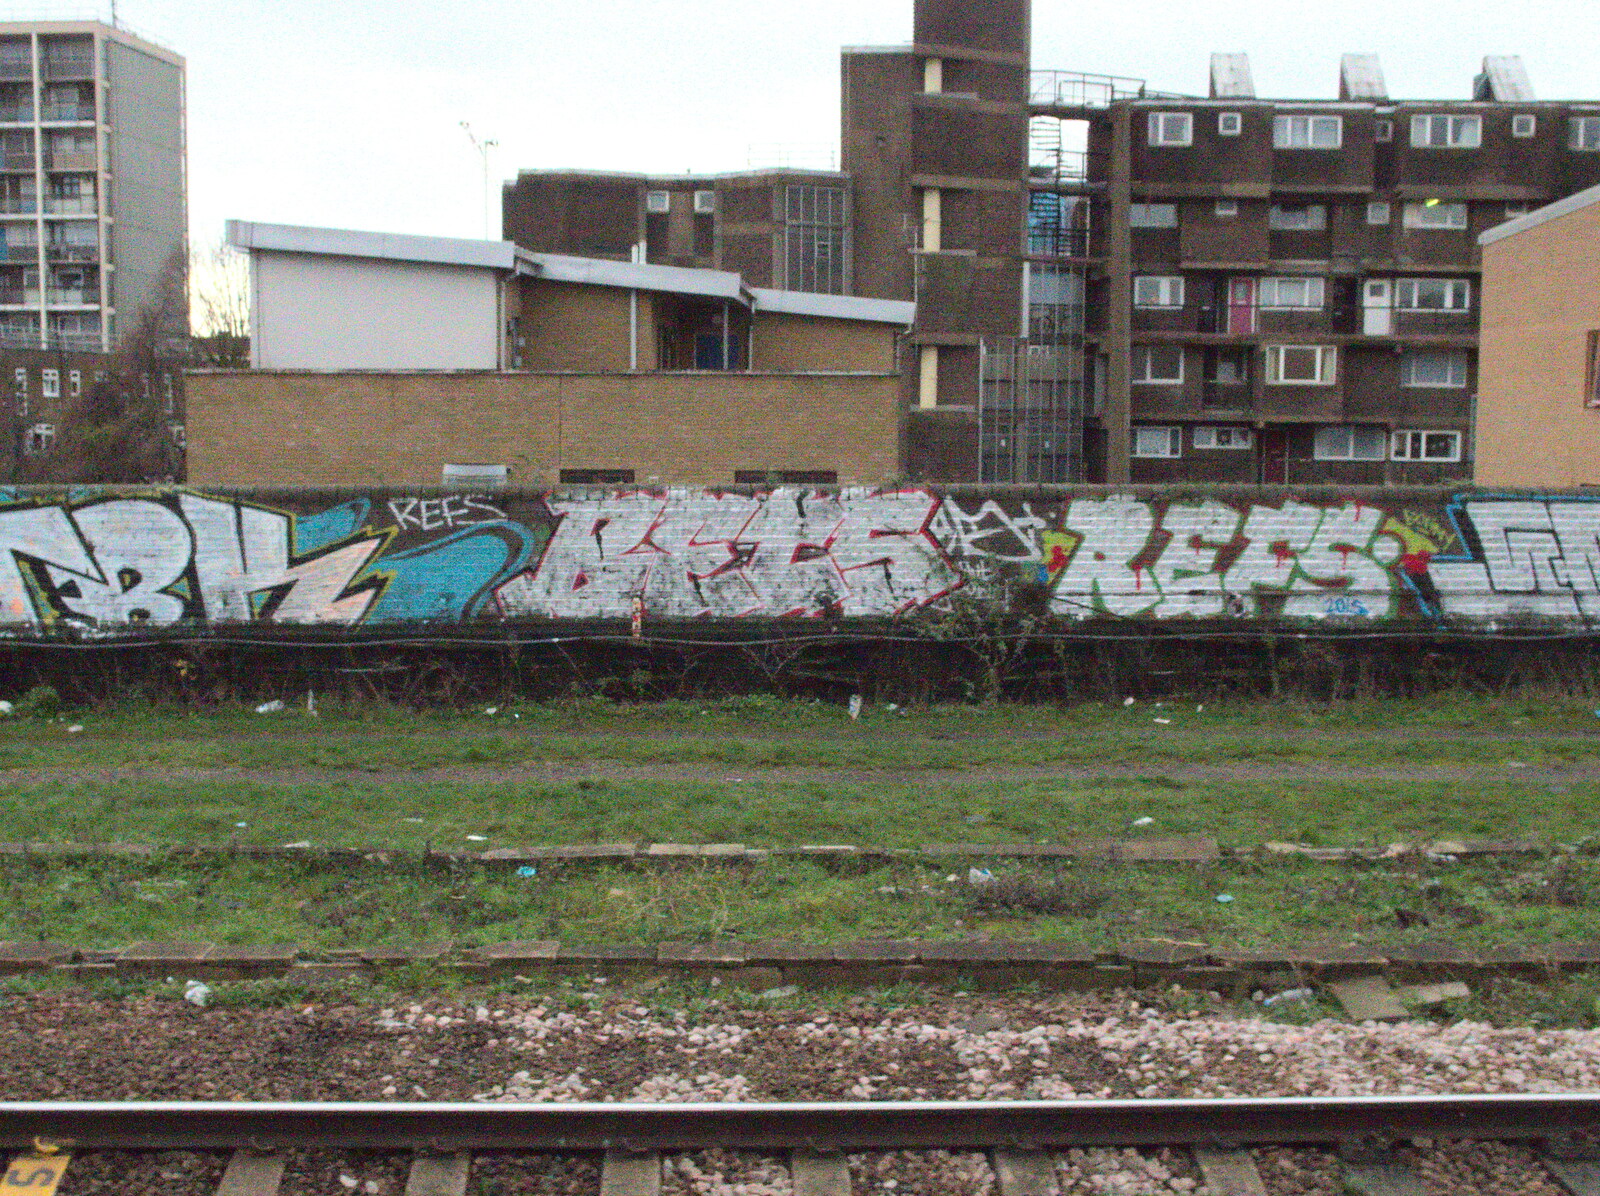 More graffiti in Tower Hamlets from A London Lunch, Borough, Southwark - 15th December 2015